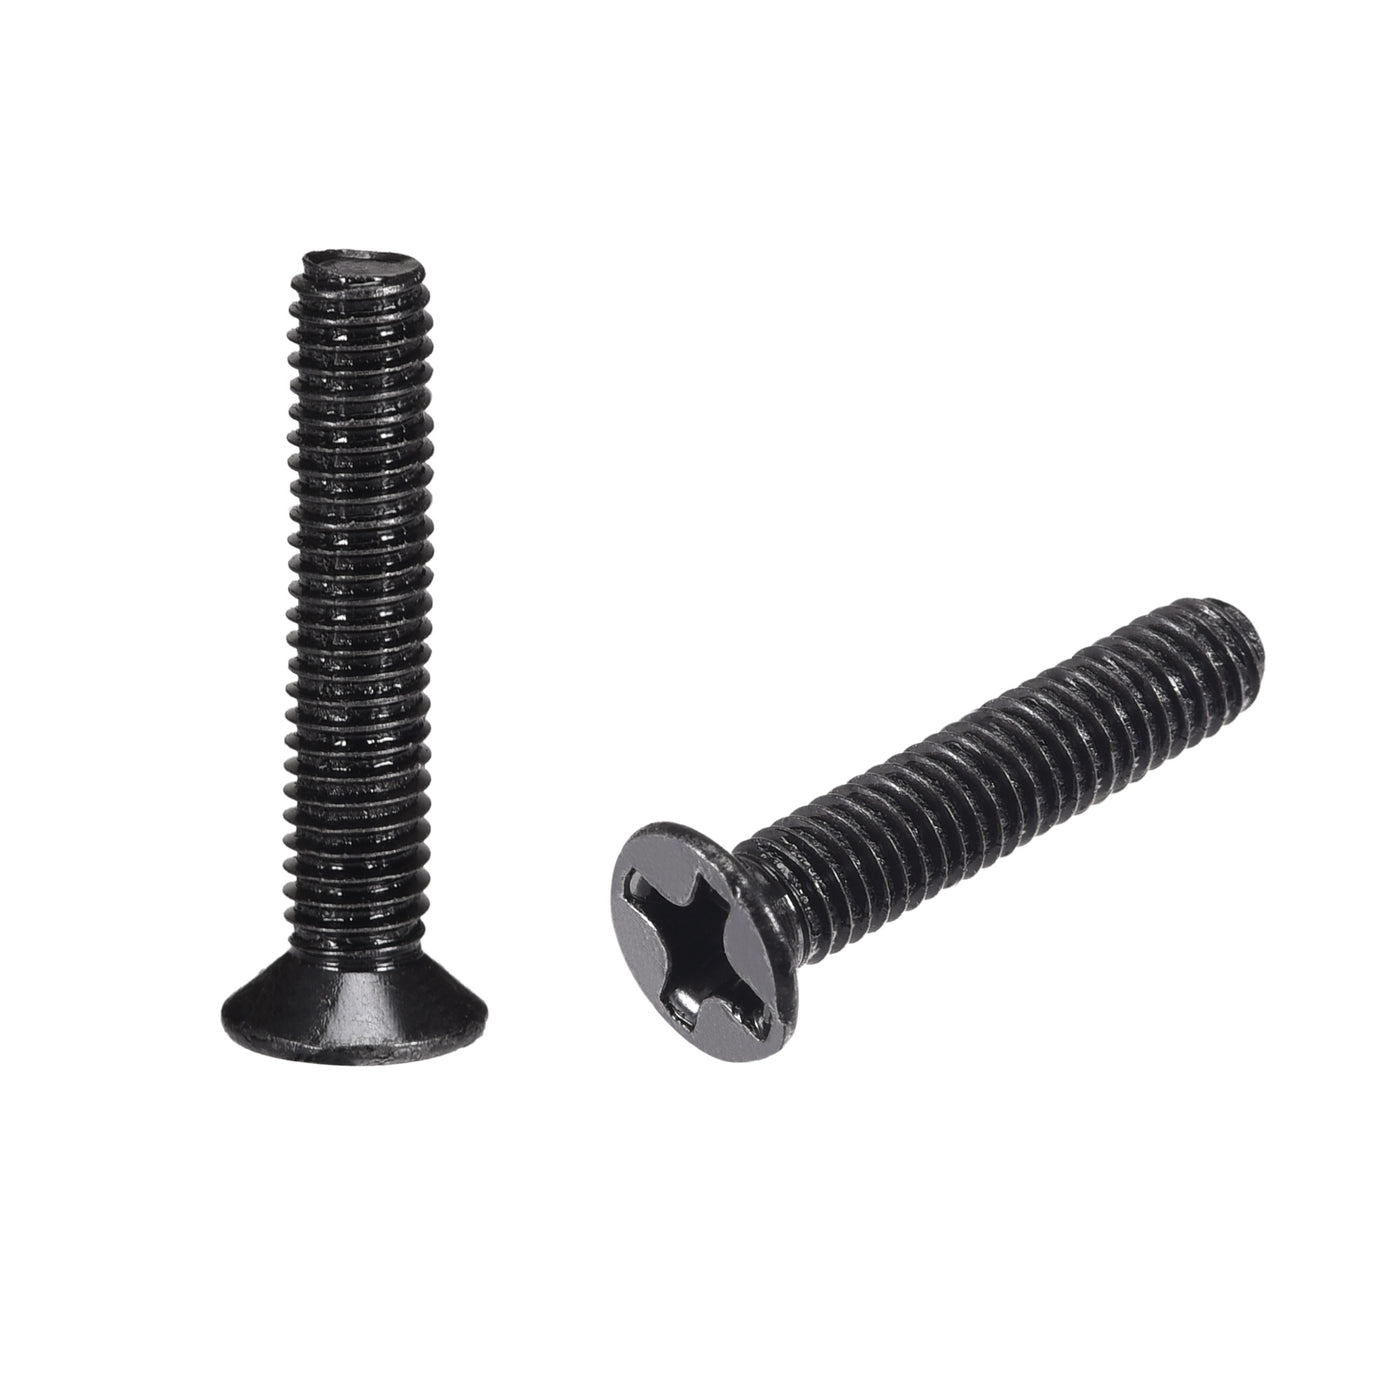 uxcell Uxcell M3 x 16mm Phillips Flat Head Screws Carbon Steel Machine Screws Black for Home Office Computer Case Appliance Equipment 150pcs